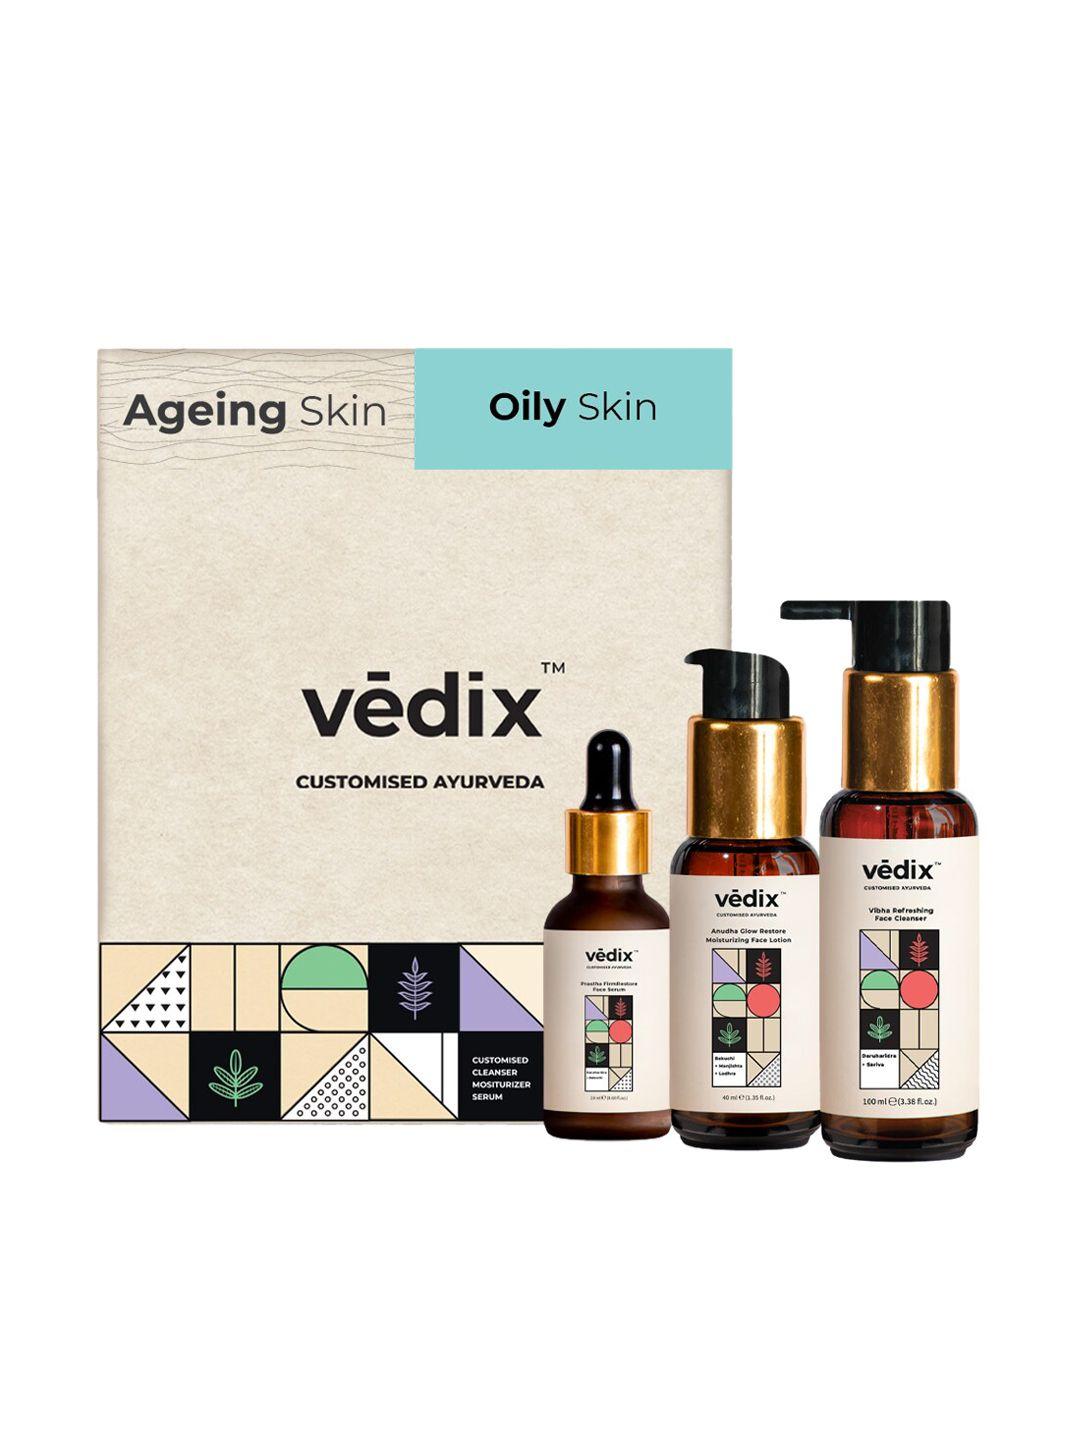 vedix-customized-skin-care-kit-for-visible-signs-for-ageing-for-oily-skin